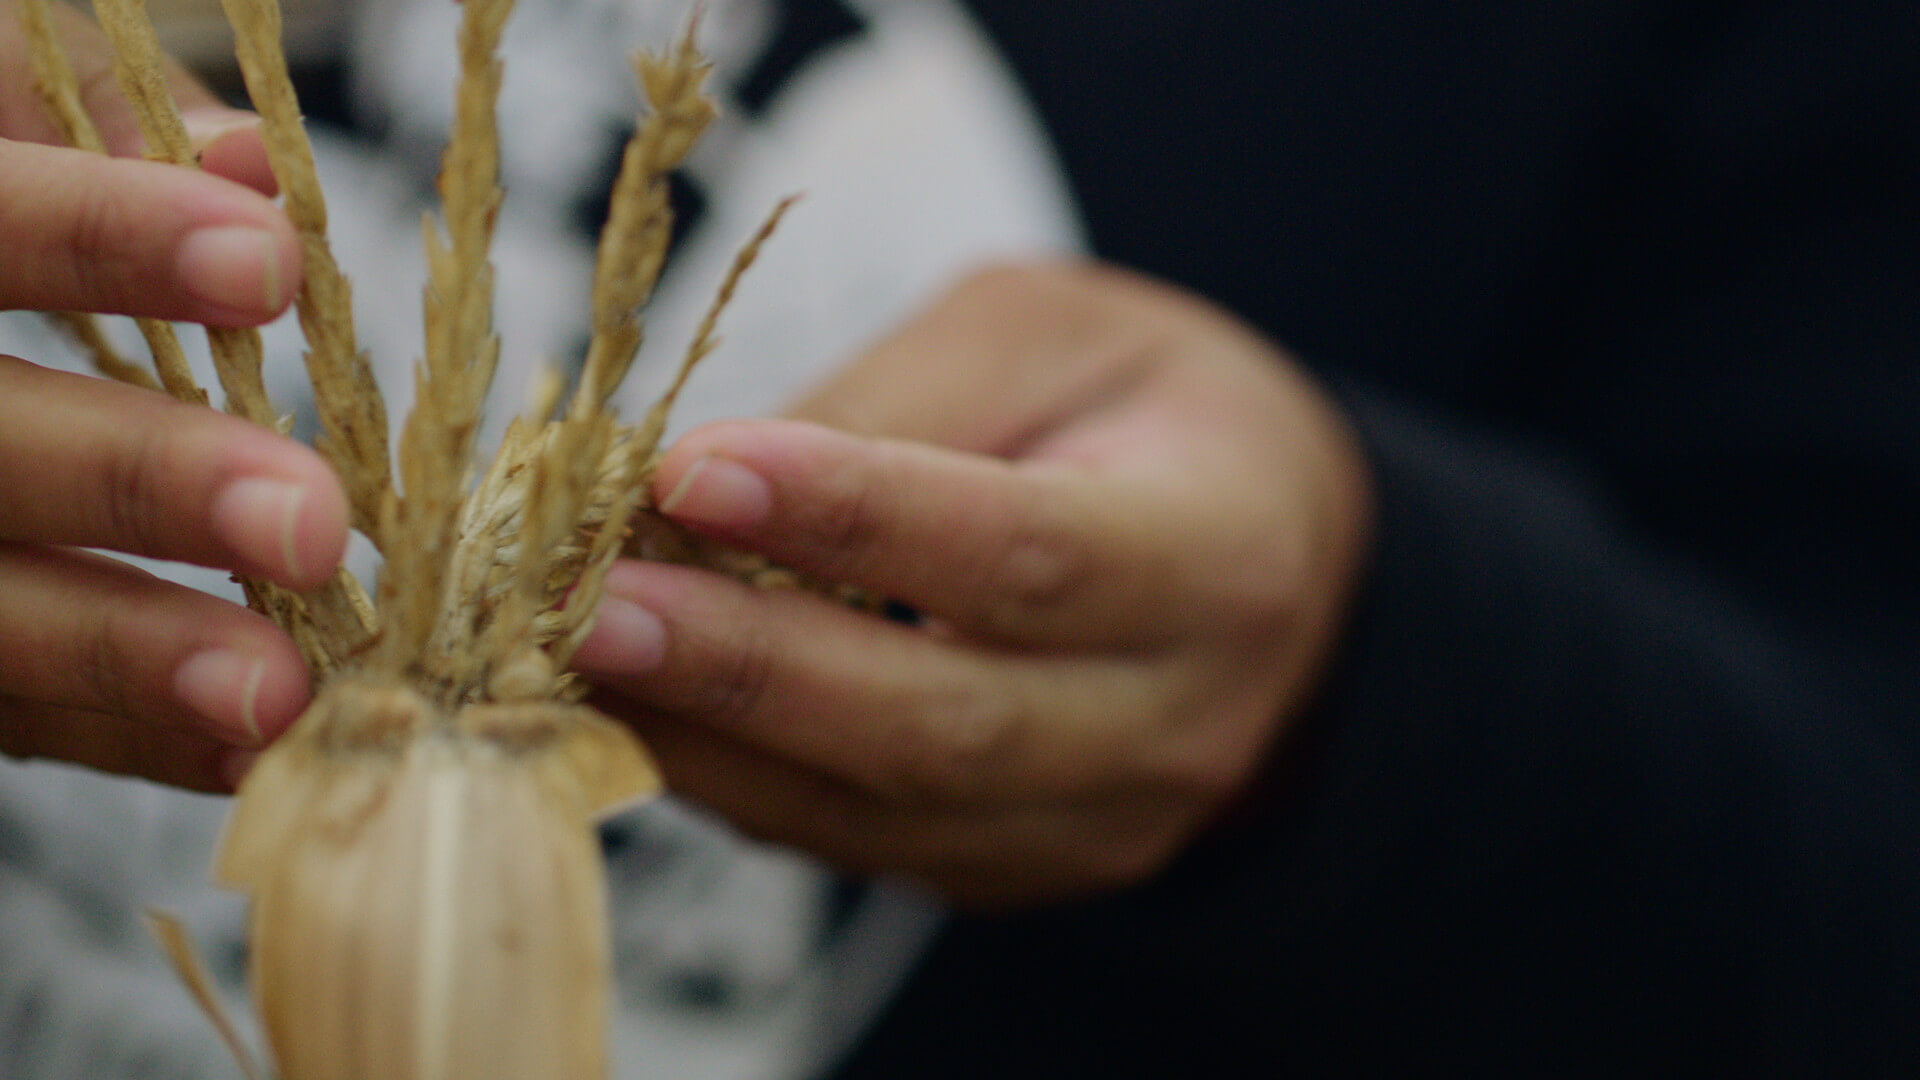 Still from Sol in the Garden. A woman's hand is touching a dried corn husk.